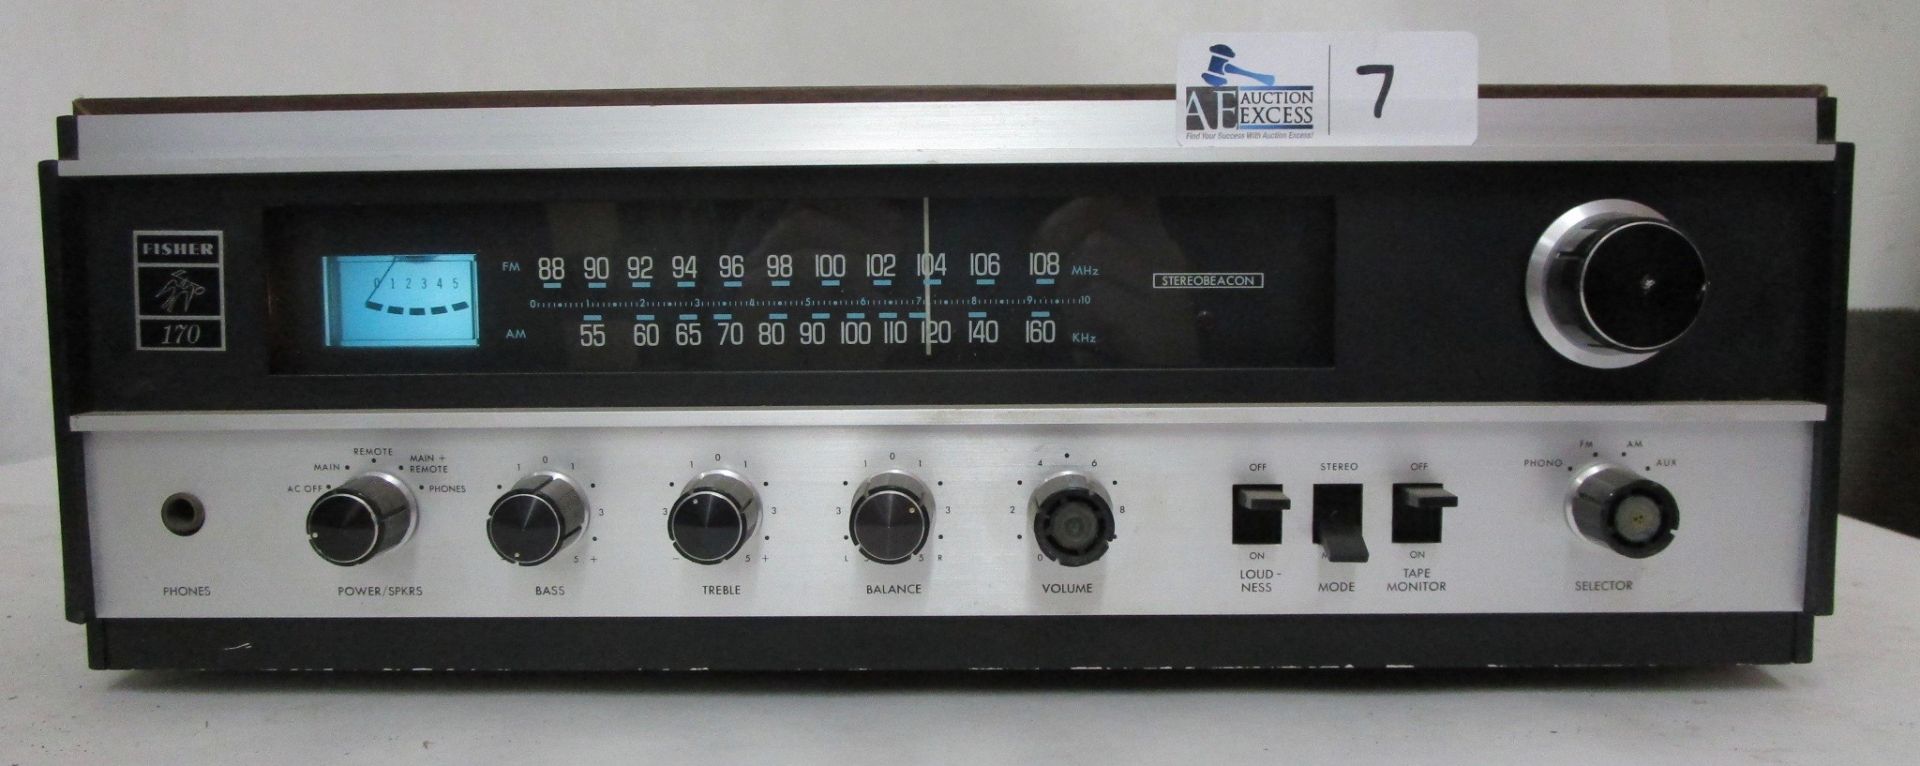 FISHER 170 RECEIVER